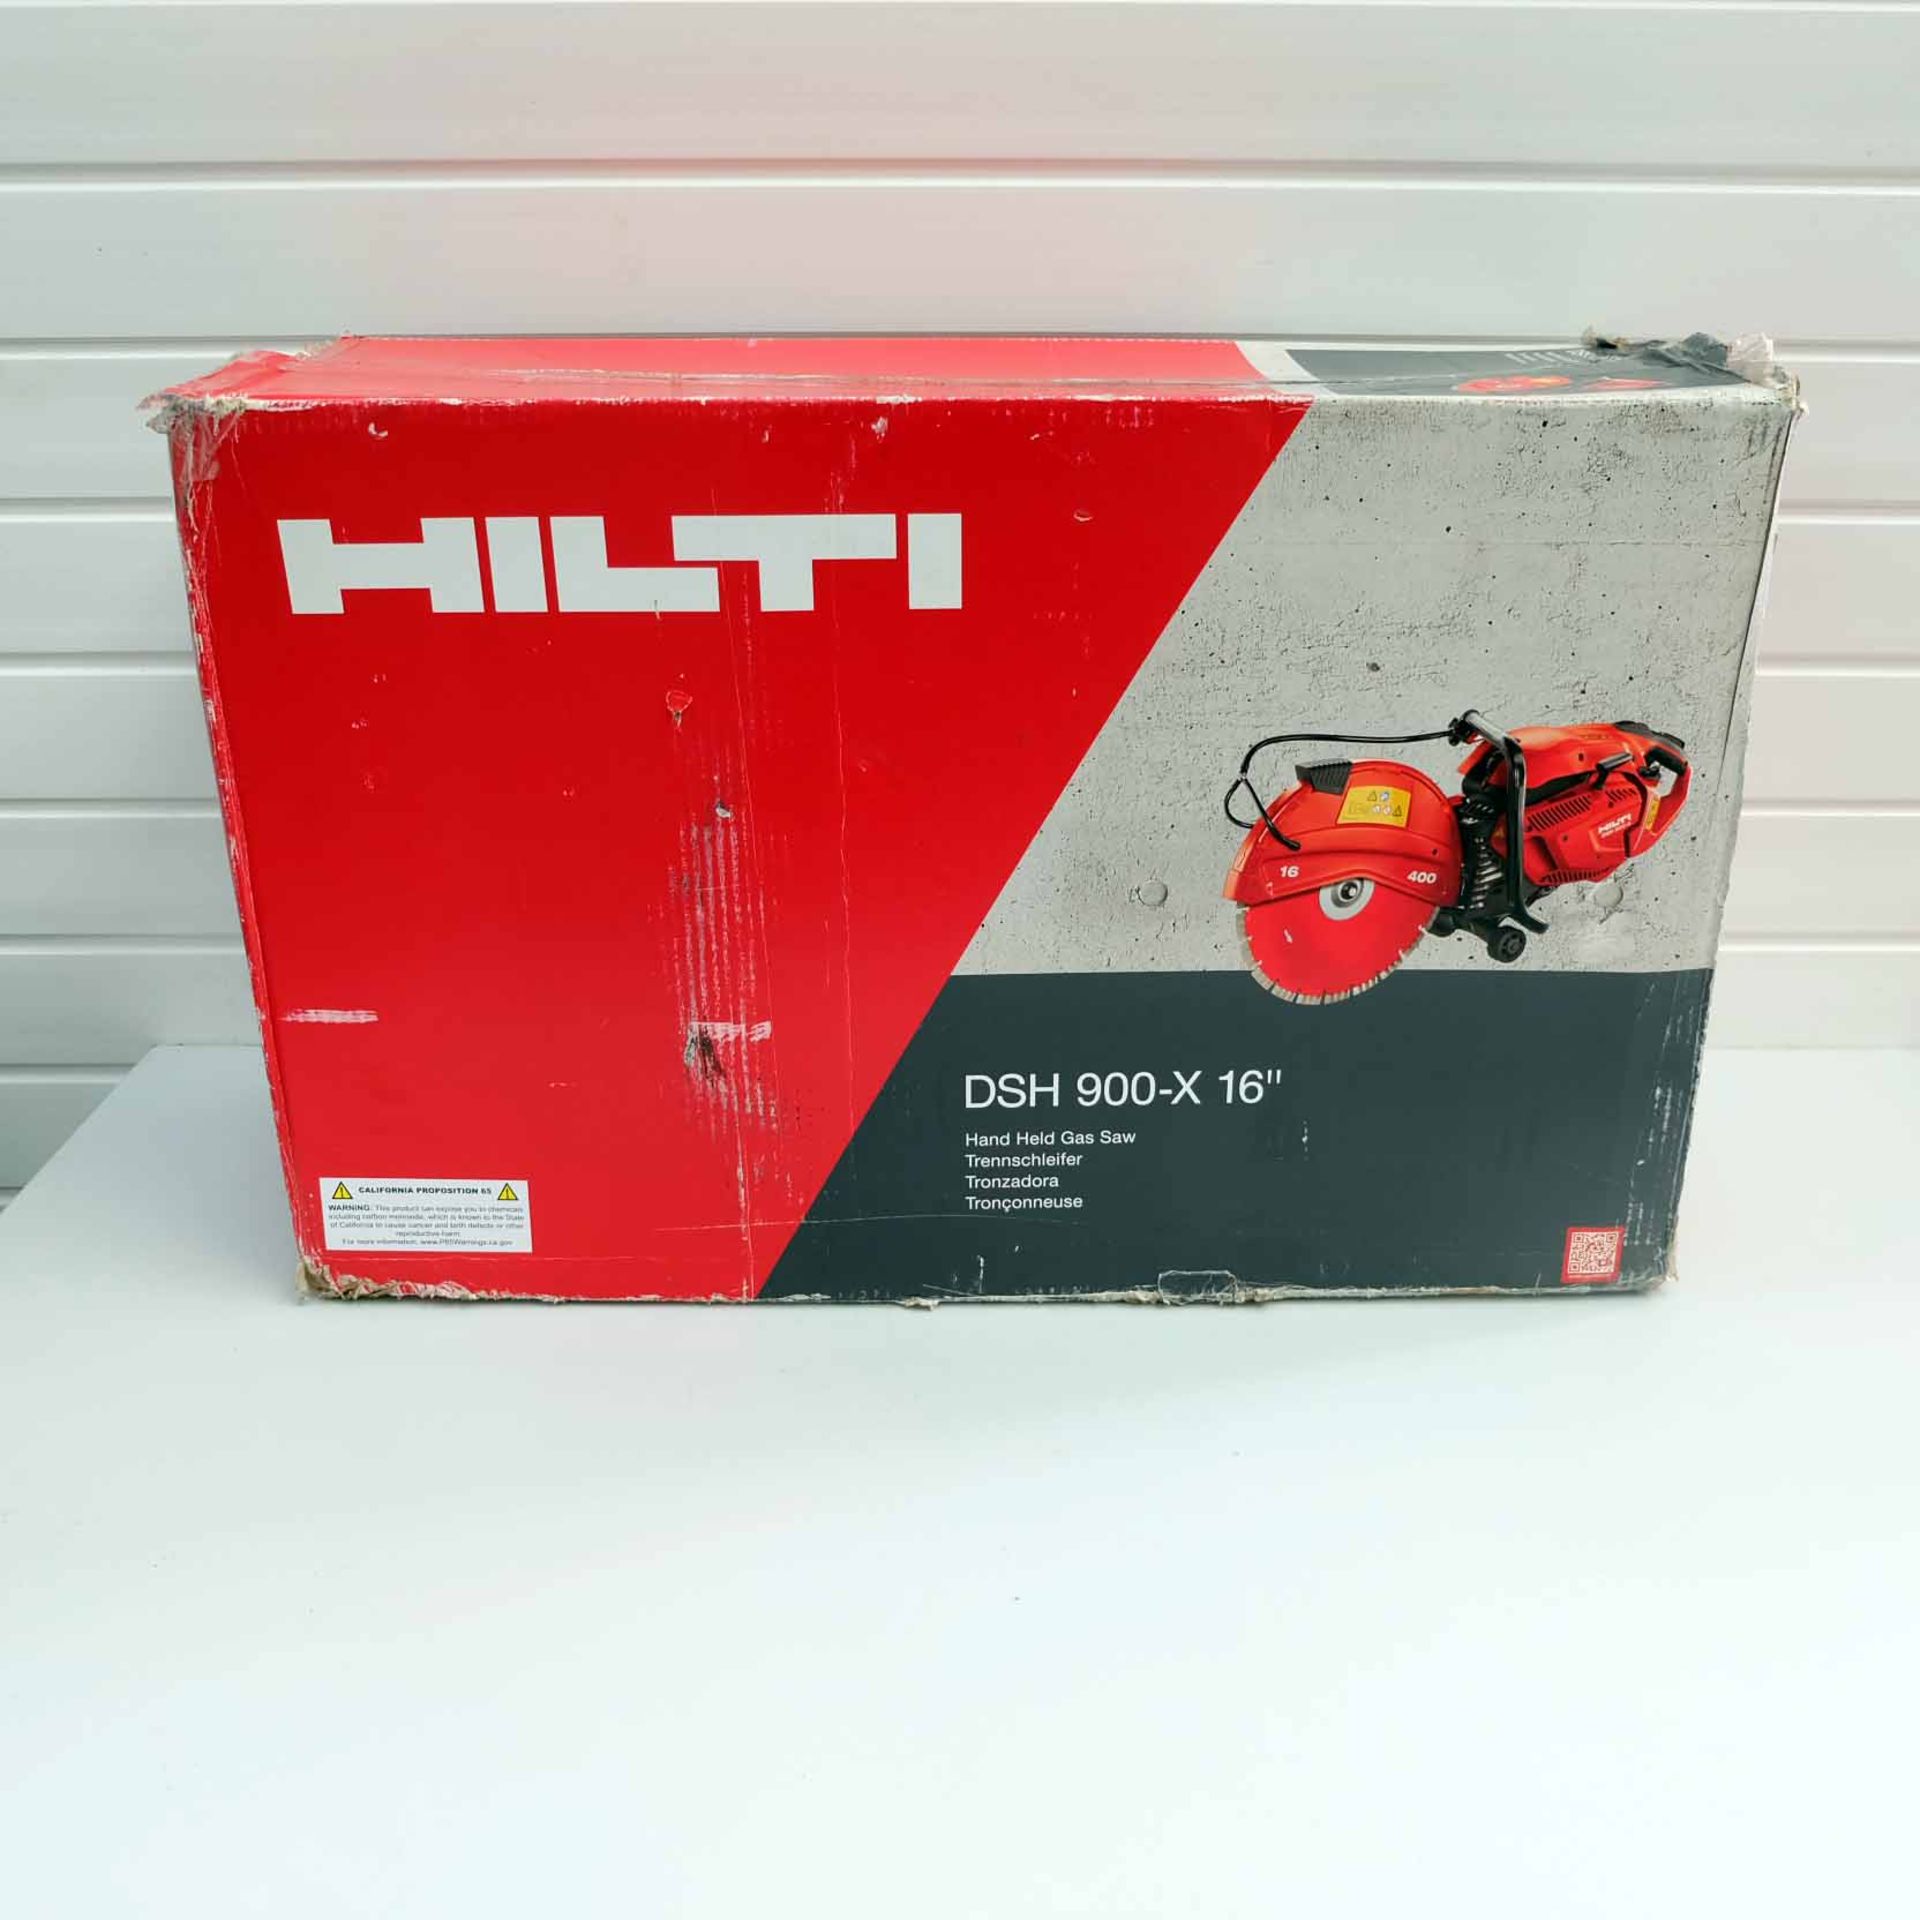 Hilti Hand Held Gas Saw. Model DSH 900-X 16". Complete With SP-16"x1" Blade. Easy Start Auto-Choke S - Image 25 of 25